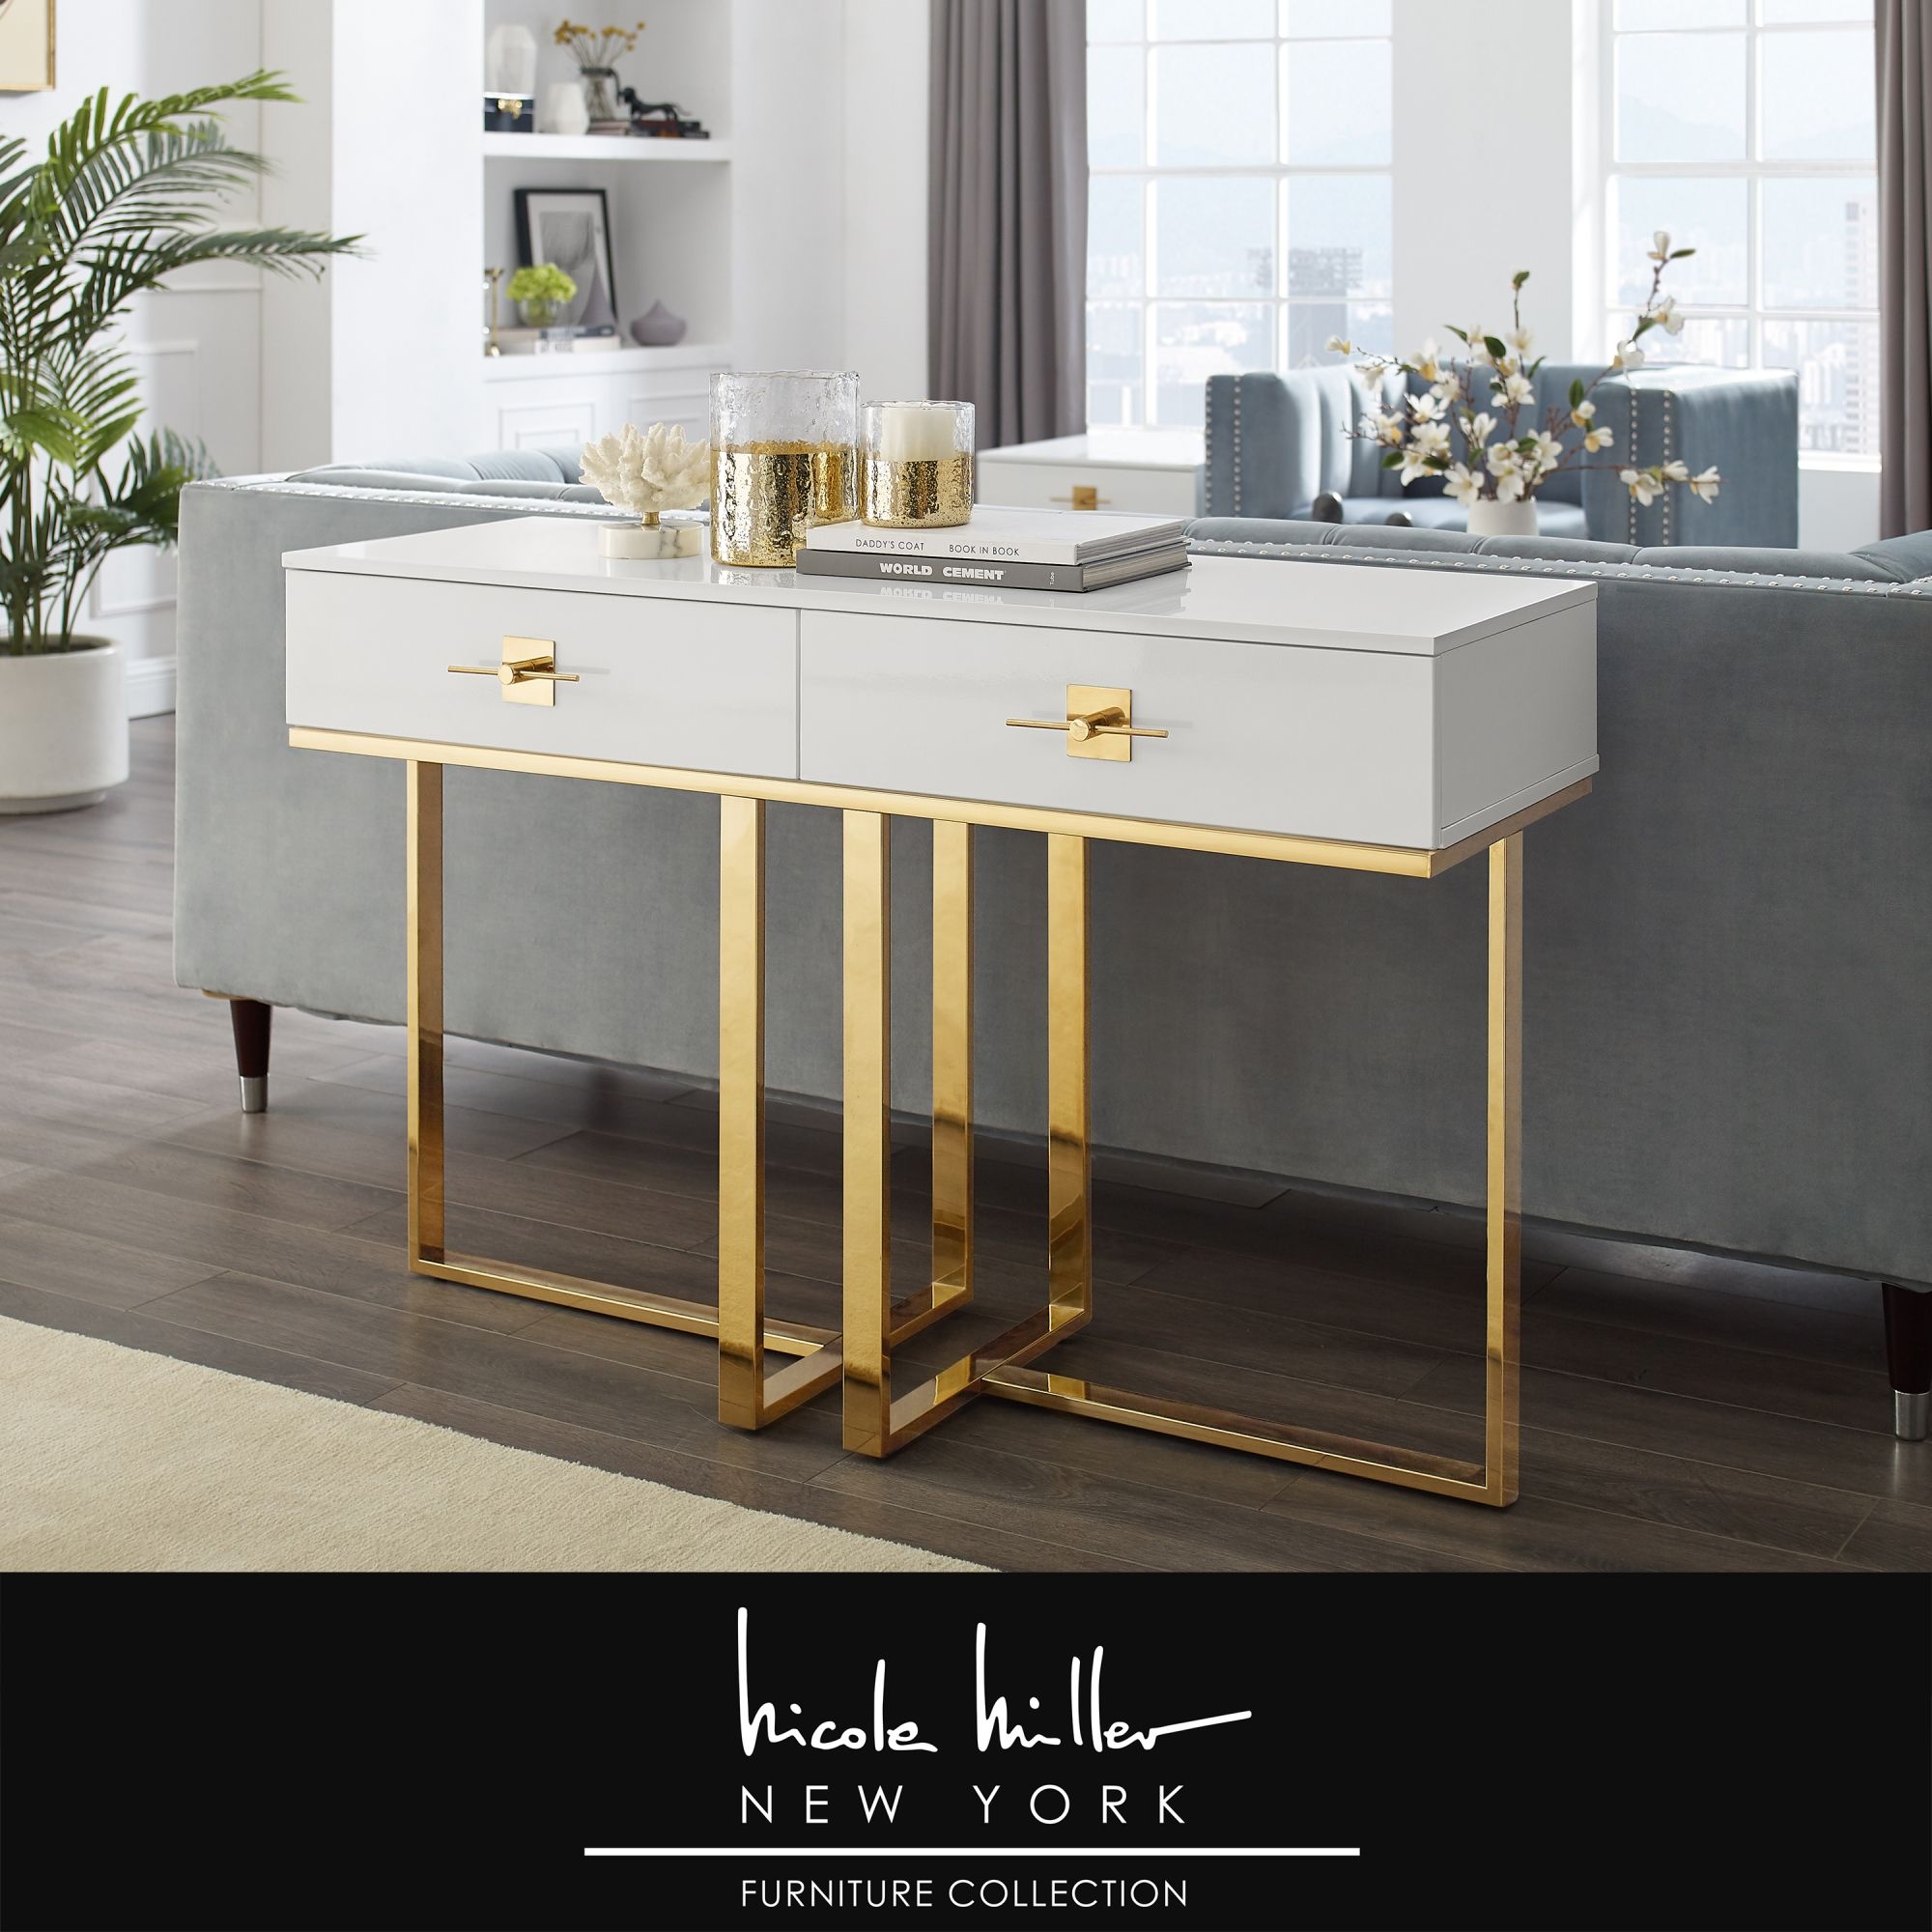 Nicole Miller Meli Console Table 2 Drawers Hight Gloss With Metallic Gold Console Tables (View 17 of 20)